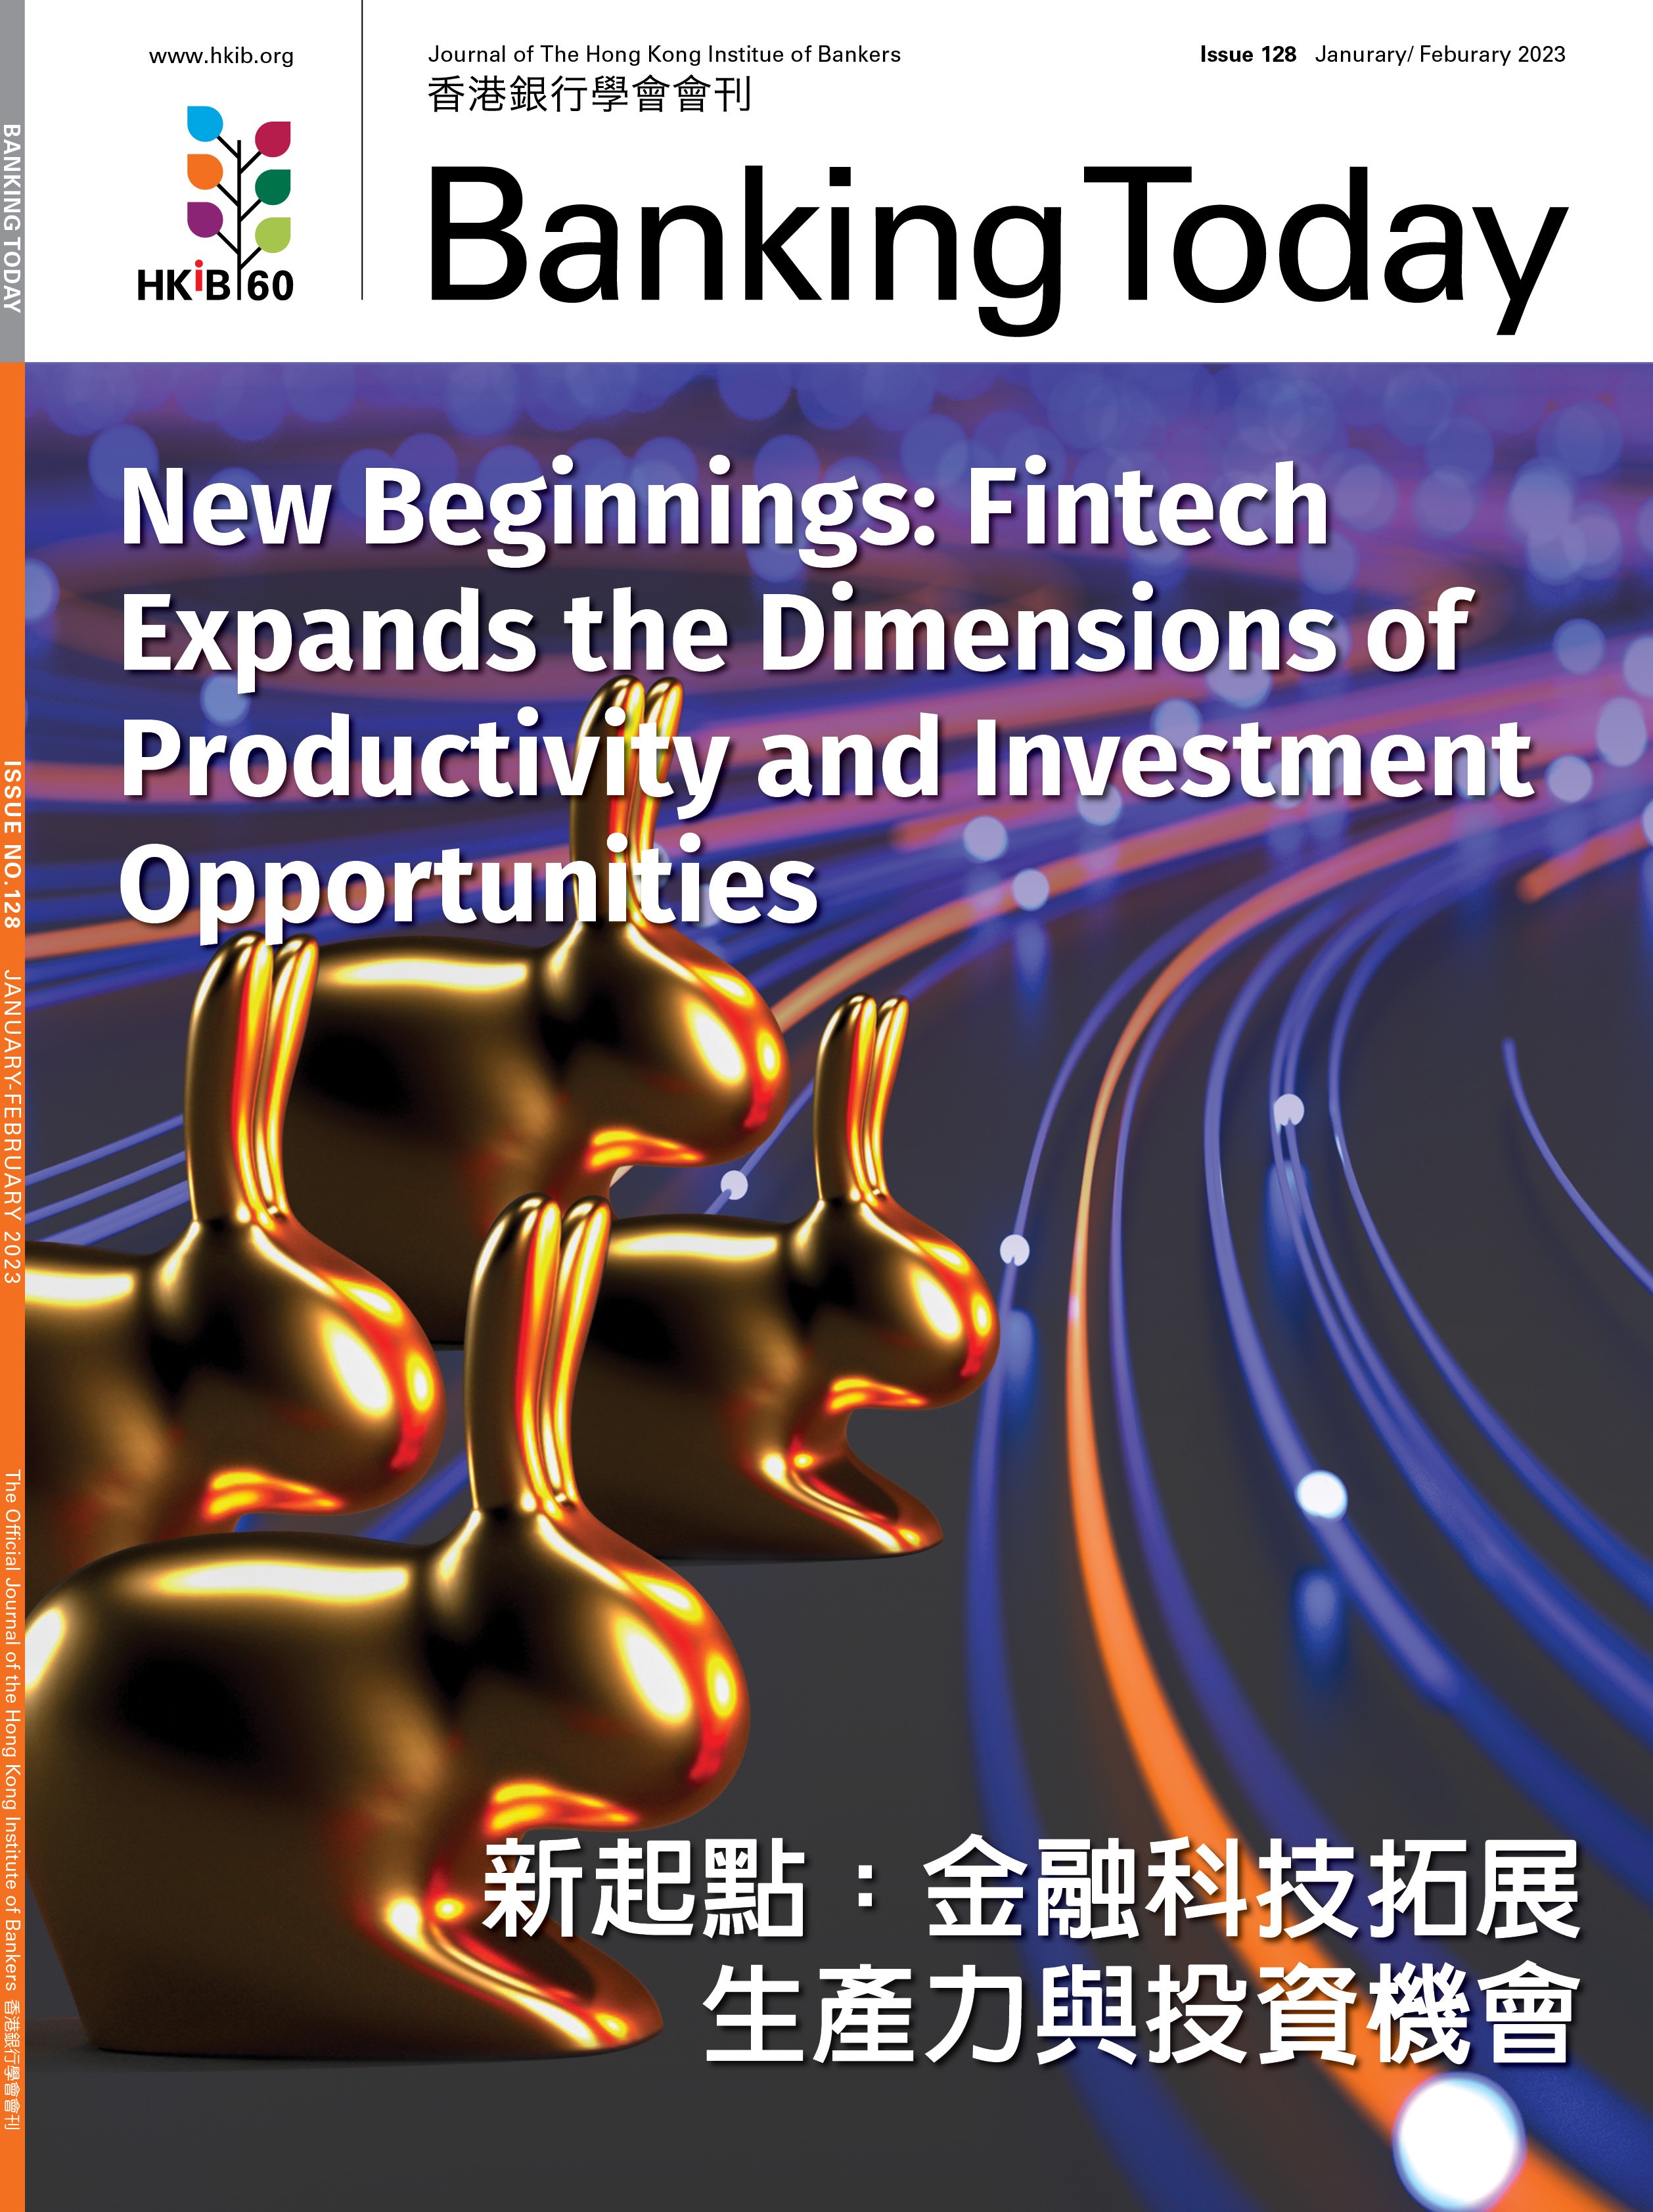 New Beginnings: Fintech Expands the Dimensions of Productivity and Investment Opportunities